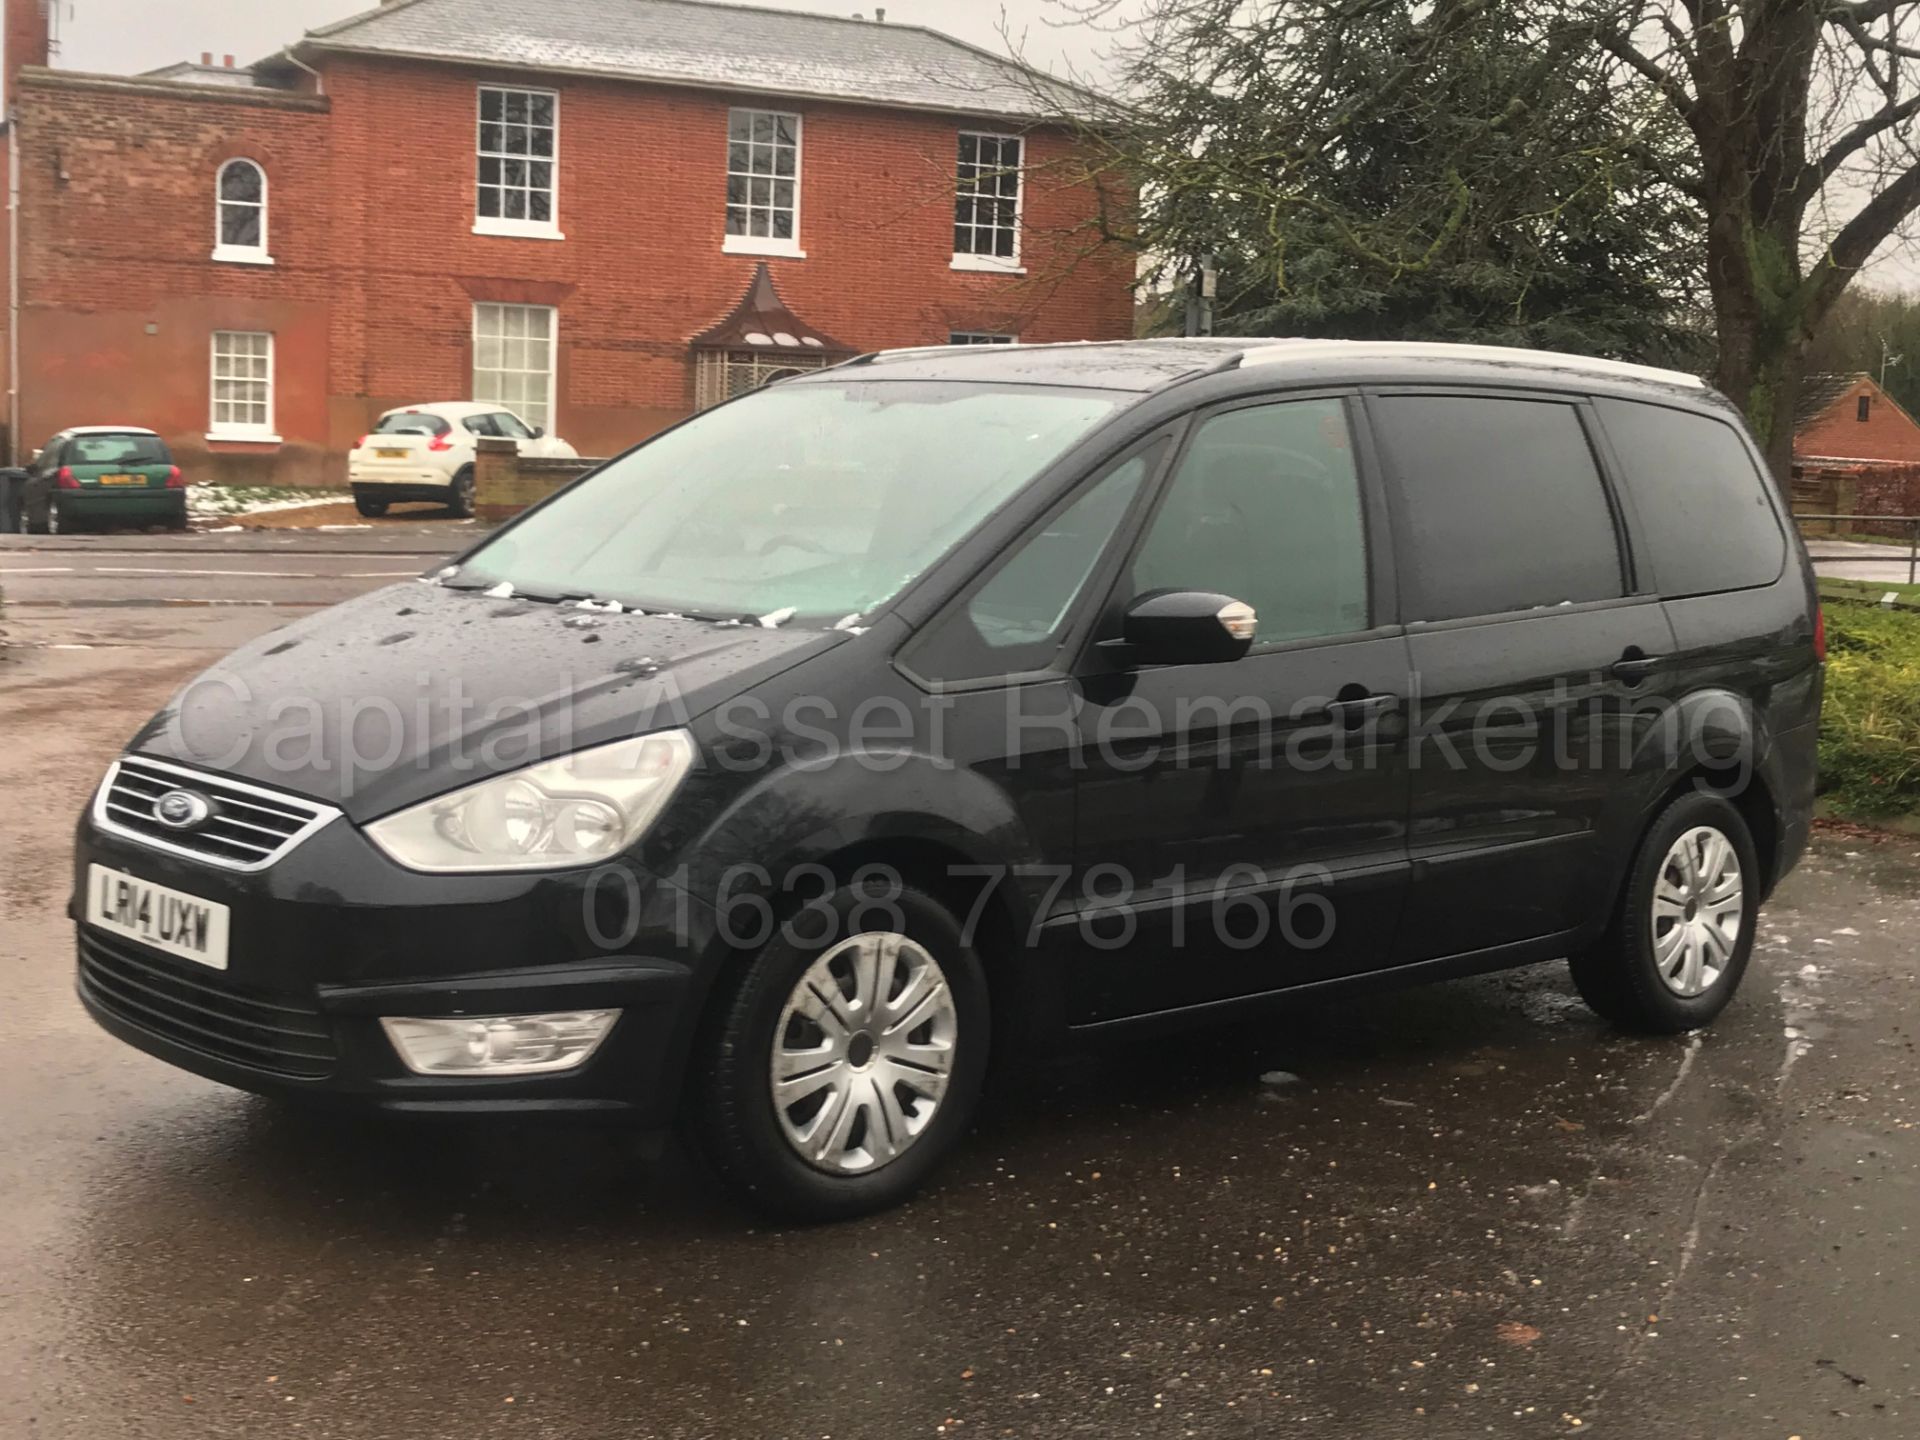 (On Sale) FORD GALAXY 'ZETEC' 7 SEATER (2014 - 14 REG) 2.0 TDCI - 140 BHP - POWER SHIFT (1 OWNER) - Image 6 of 30